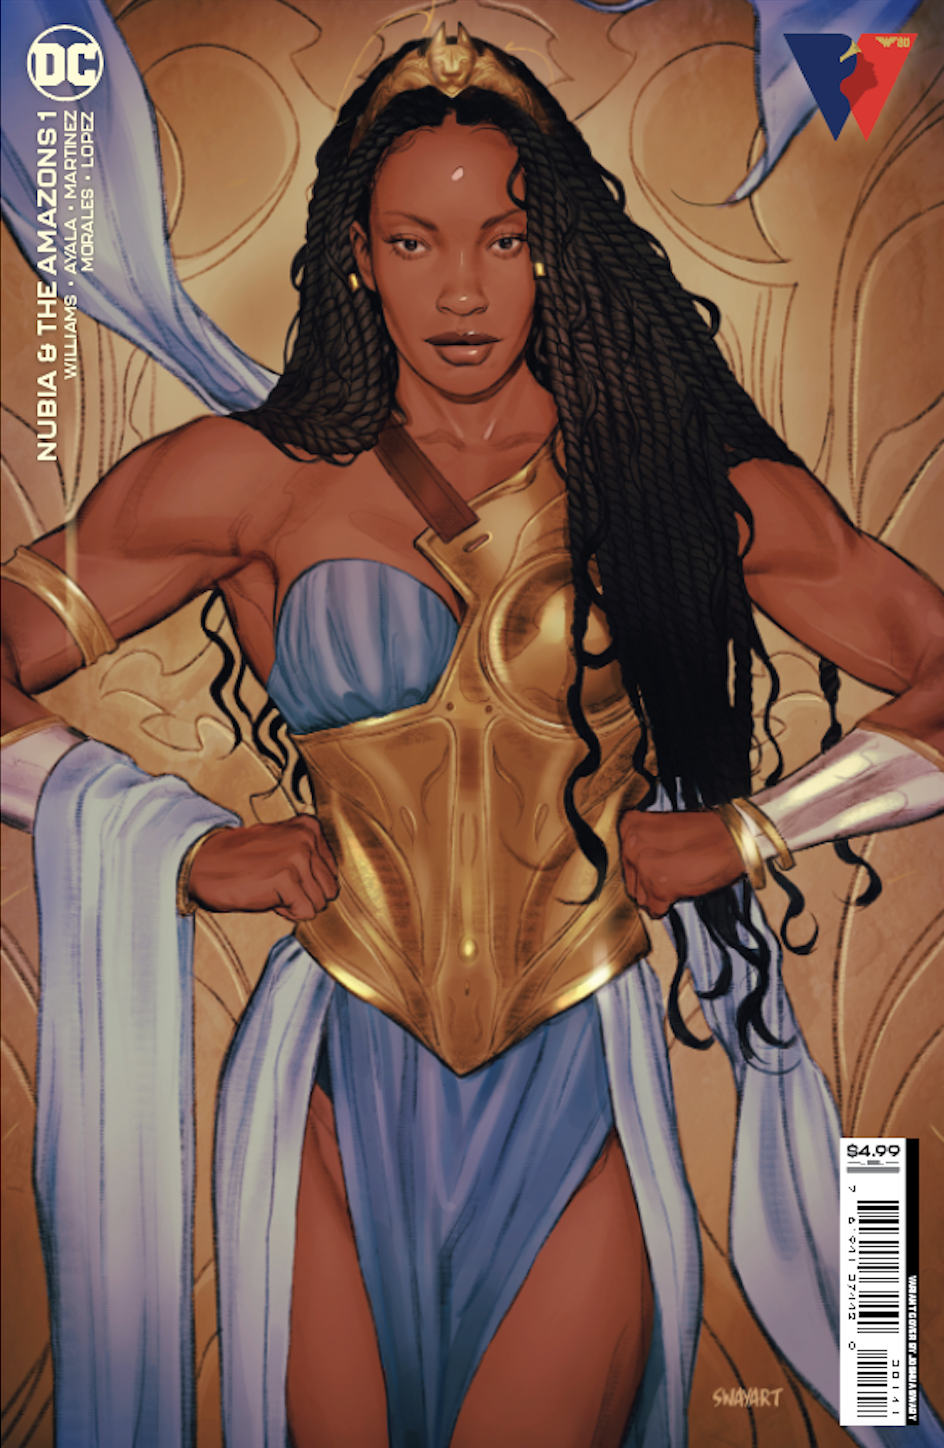 Nubia And The Amazons #1 (Of 6) C Joshua Sway Swaby Card Stock Variant (10/19/2021) Dc